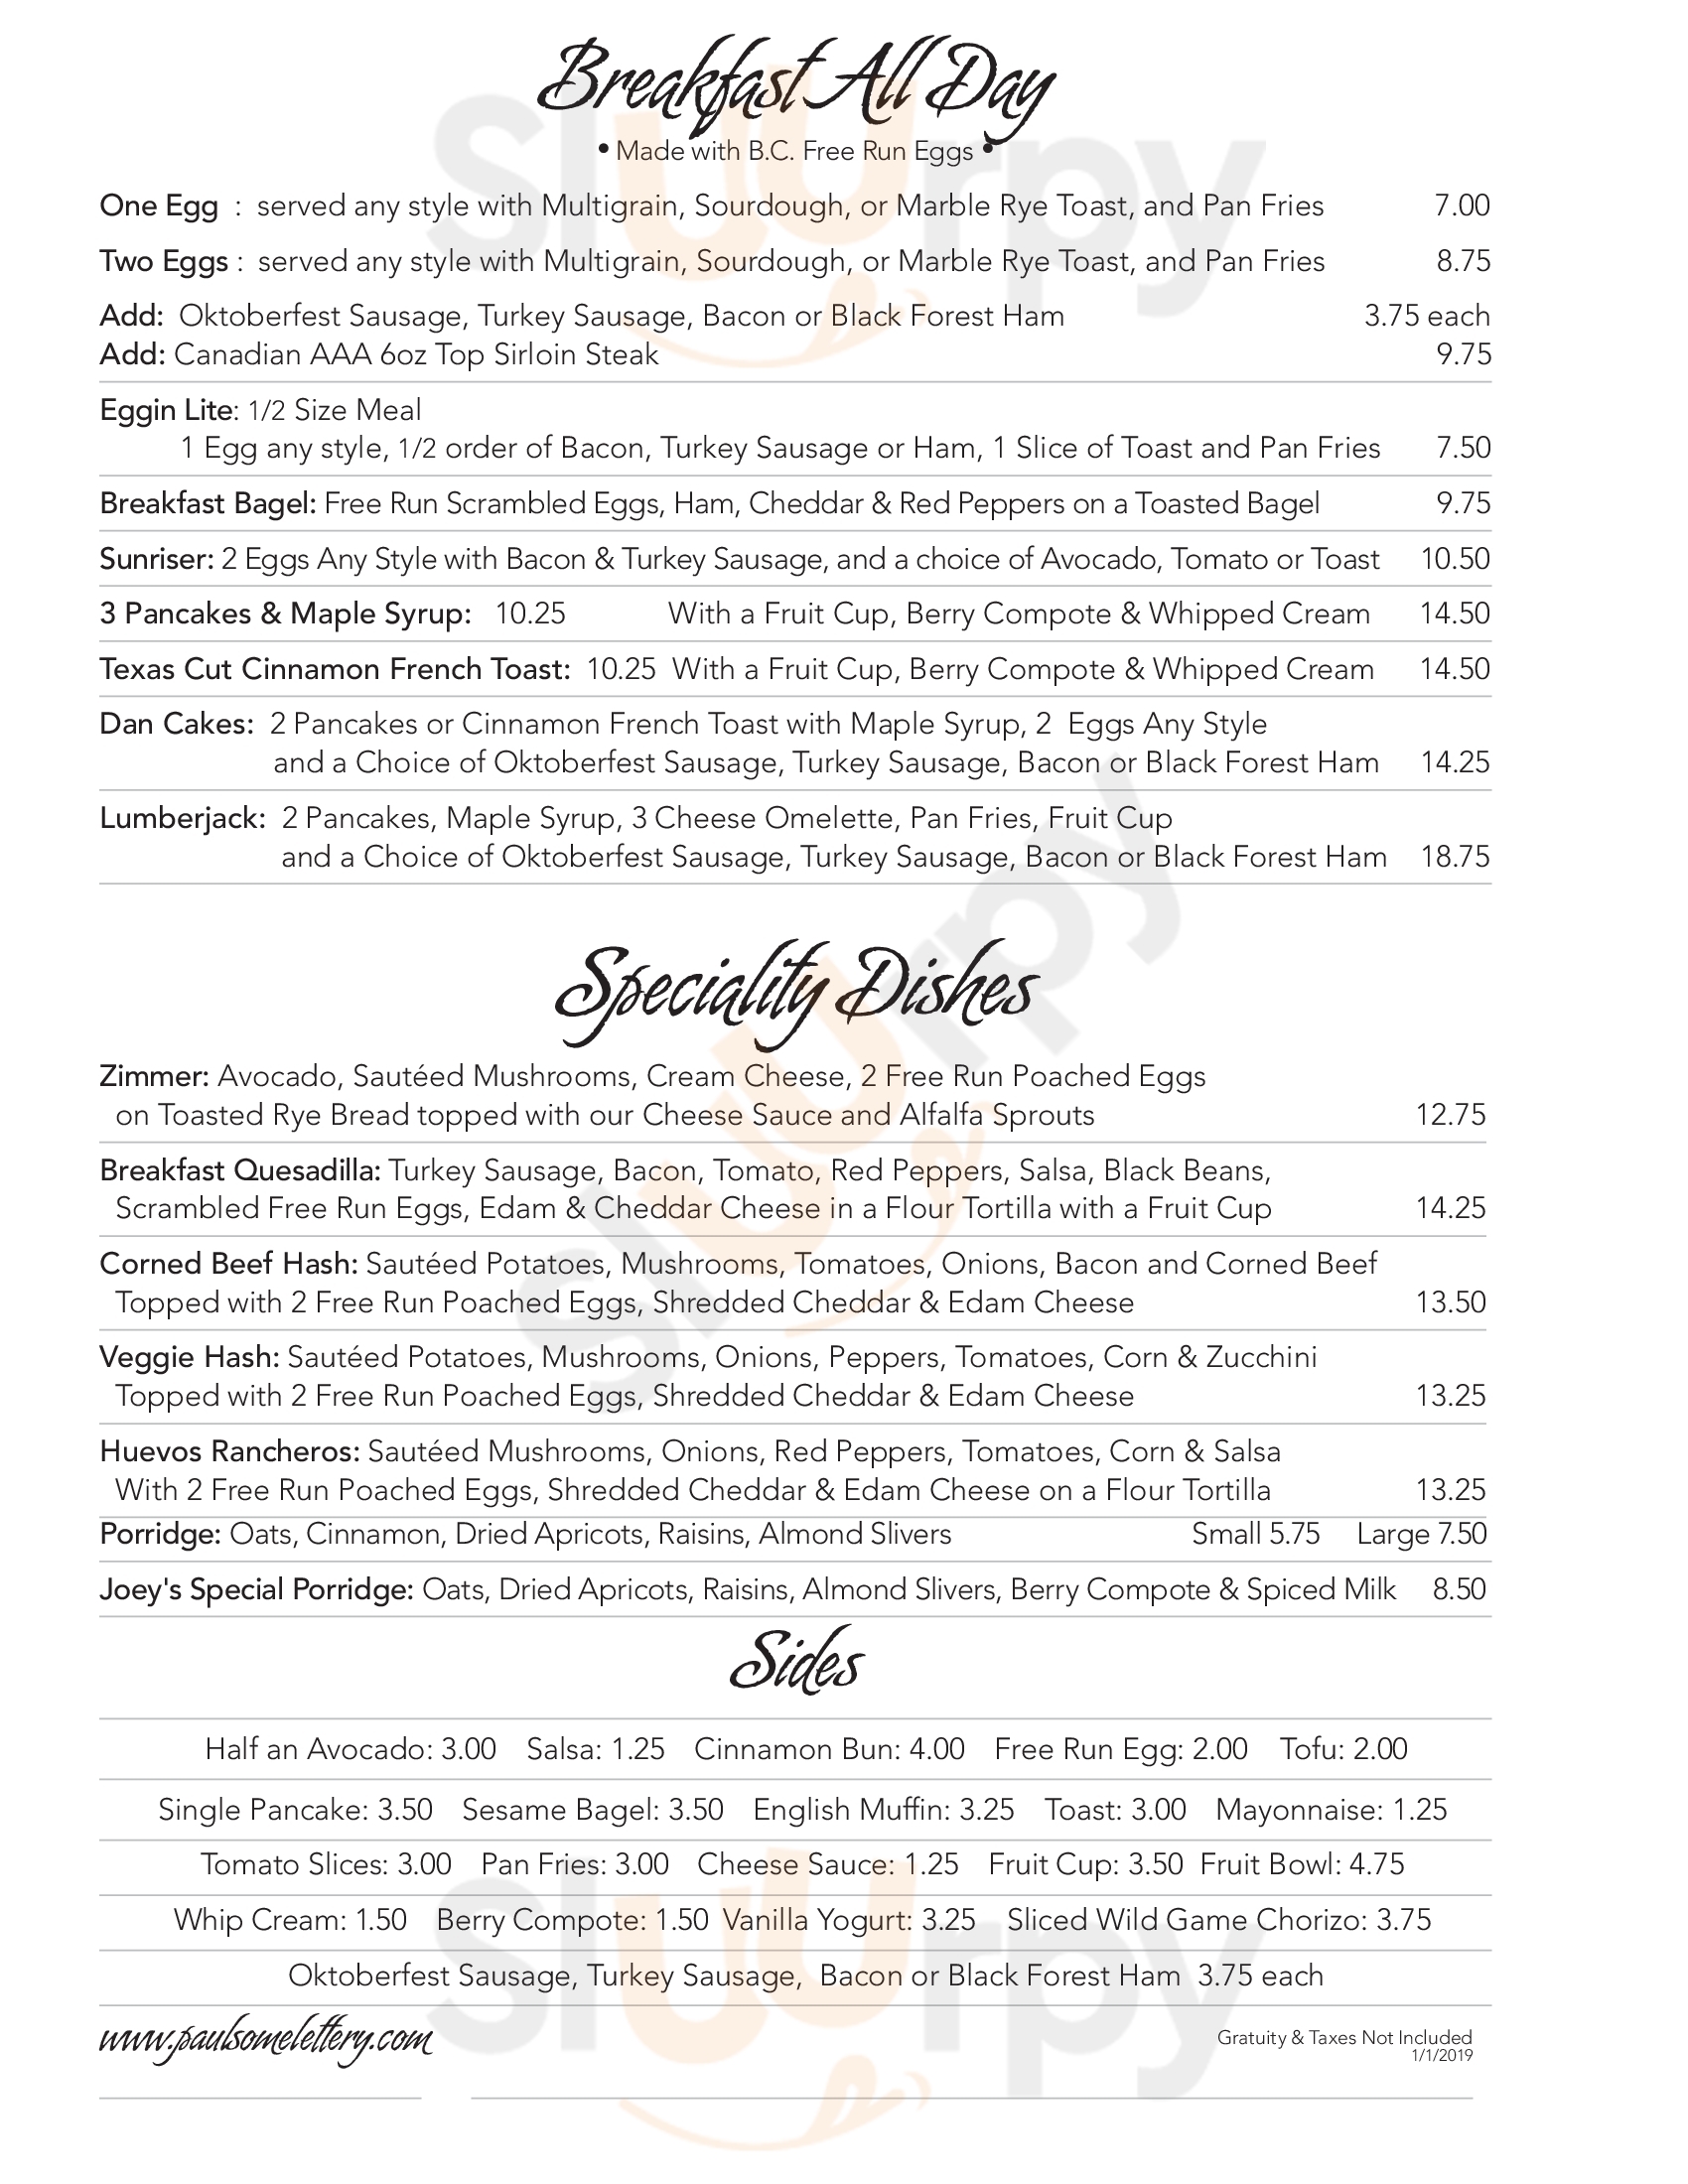 Paul's Place Omelettery Restaurant Vancouver Menu - 1